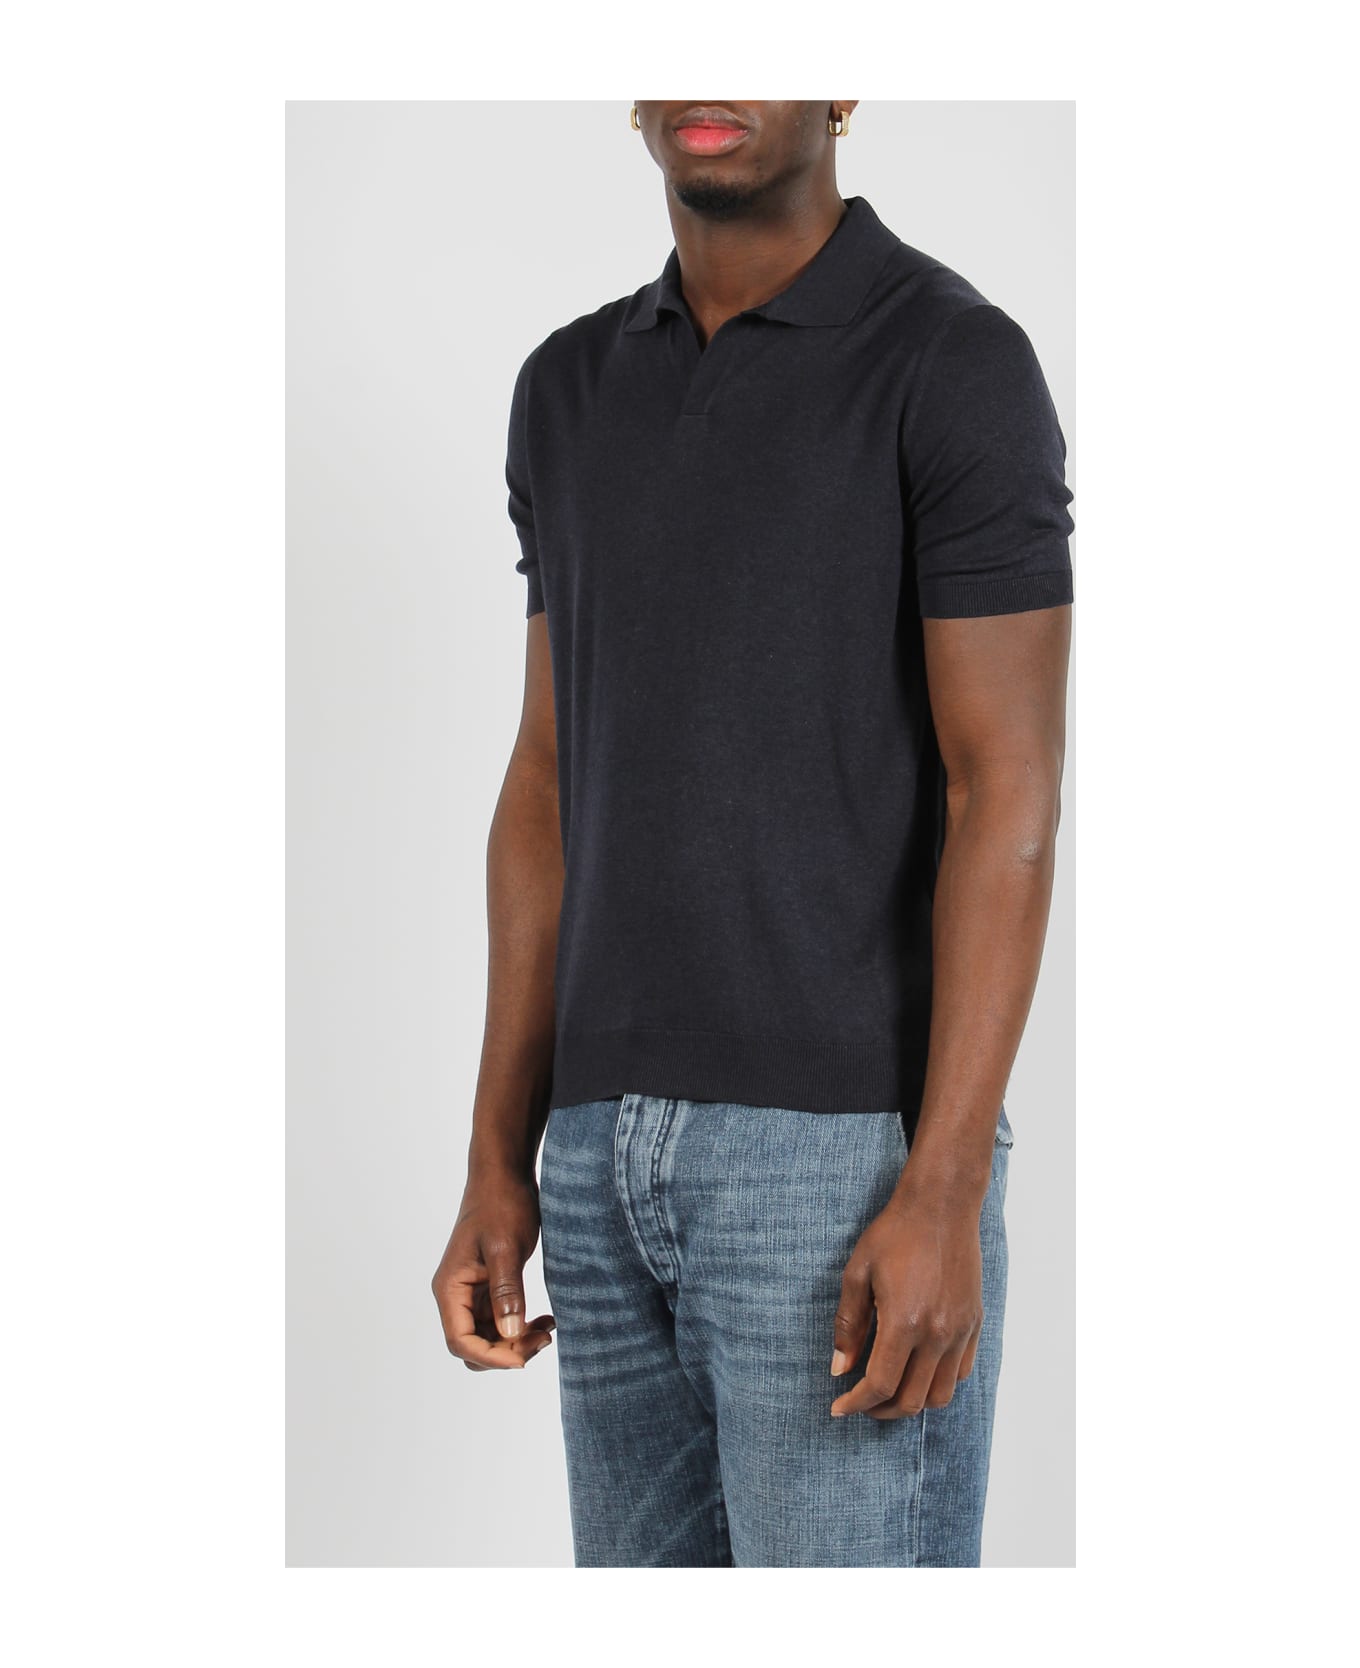 Tagliatore Open Collar Knitted Polo Shirt